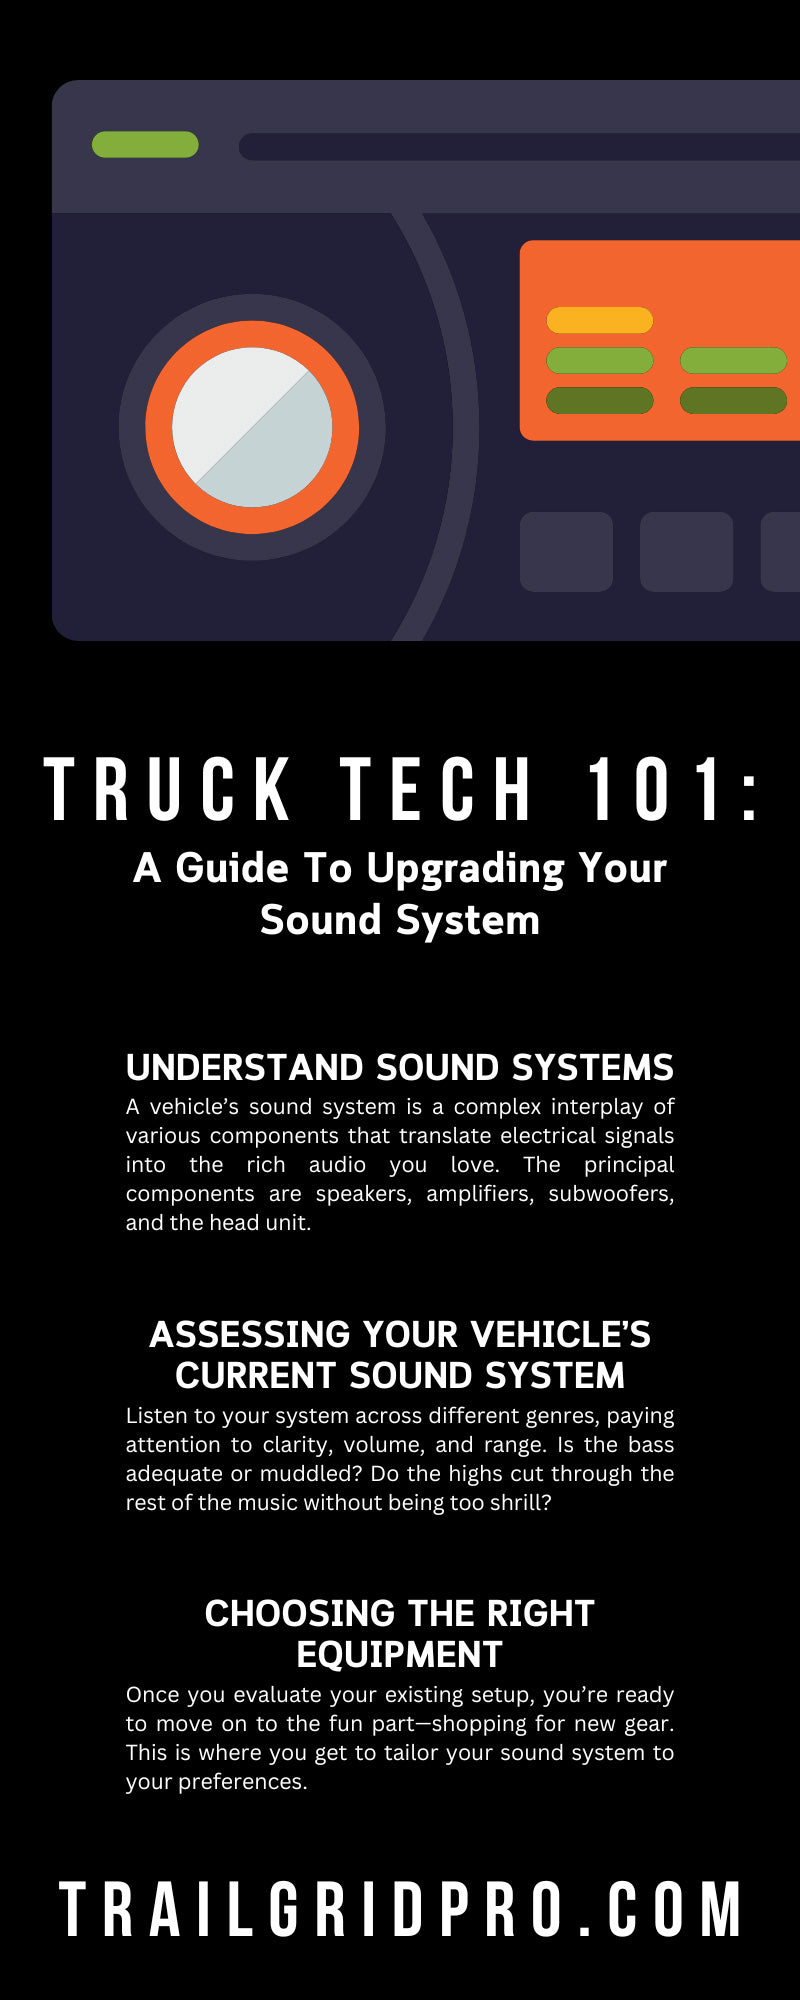 Truck Tech 101: A Guide To Upgrading Your Sound System